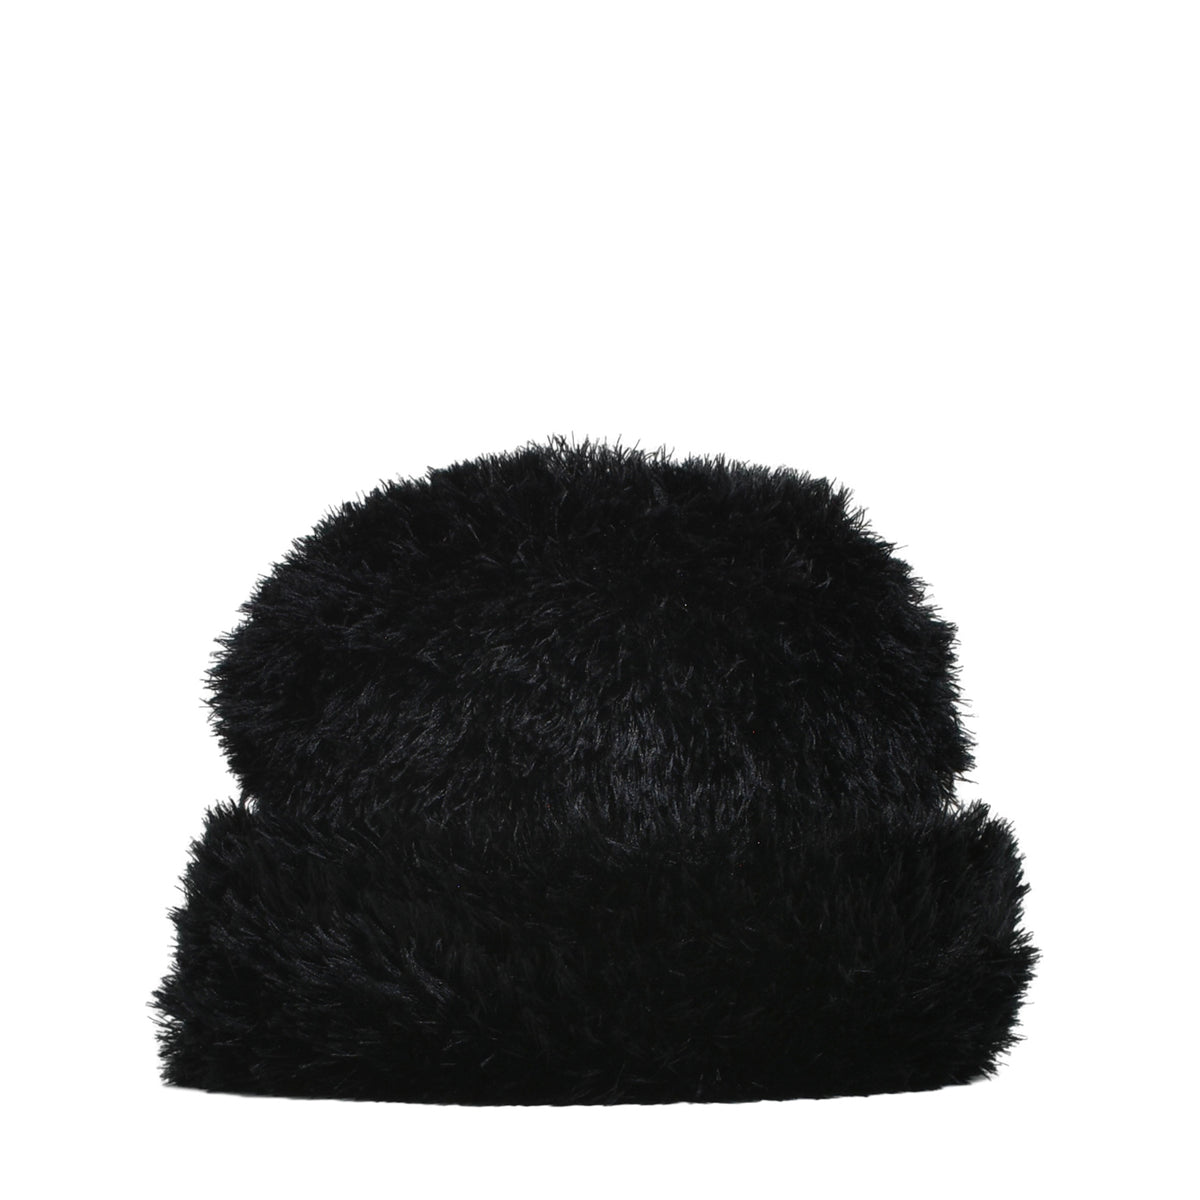 NICHOLAS DALEY ニコラス デイリー FW23 HAND KNITTED FUZZY HAT / BLK